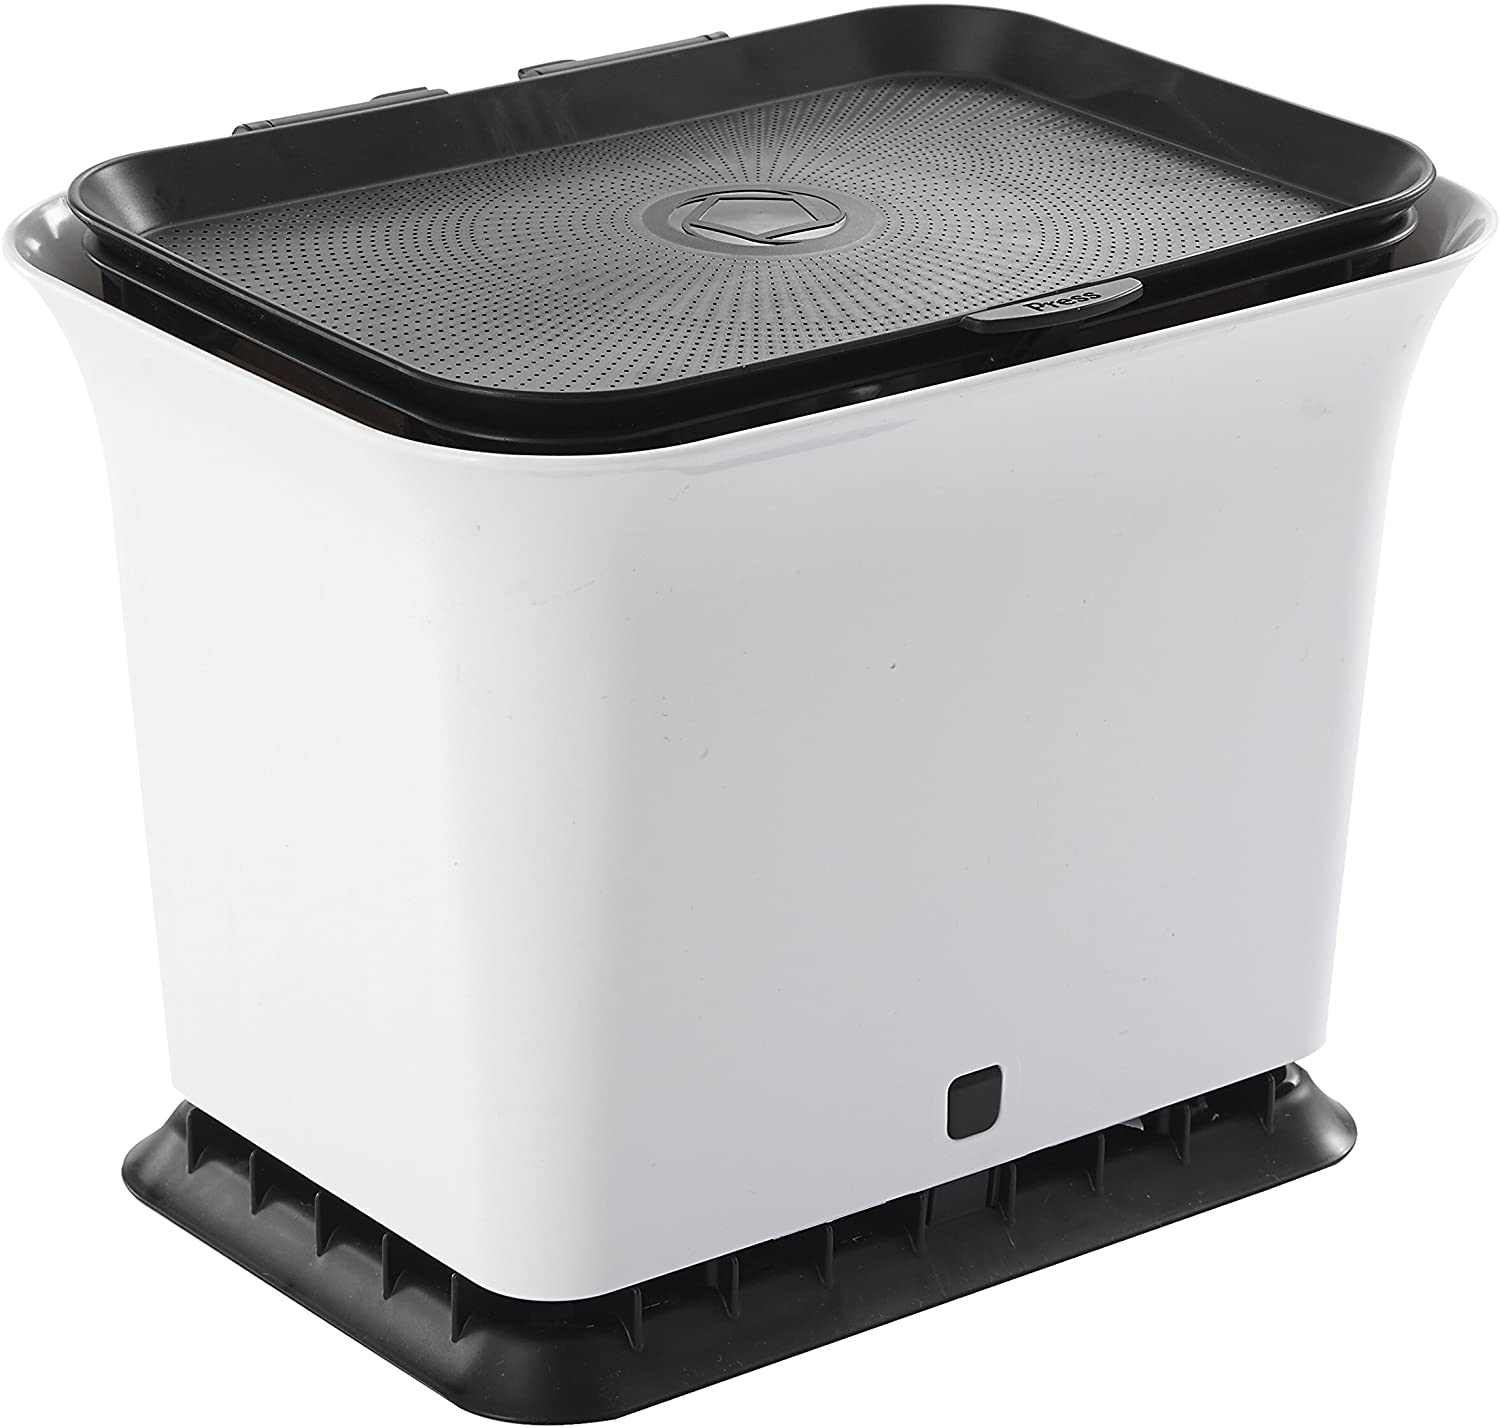 C Luntus Kitchen Compost Bin for Counter Top or Under Sink Hanging Small Trash Can with Lid,Mountable Indoor Compost Bucket 